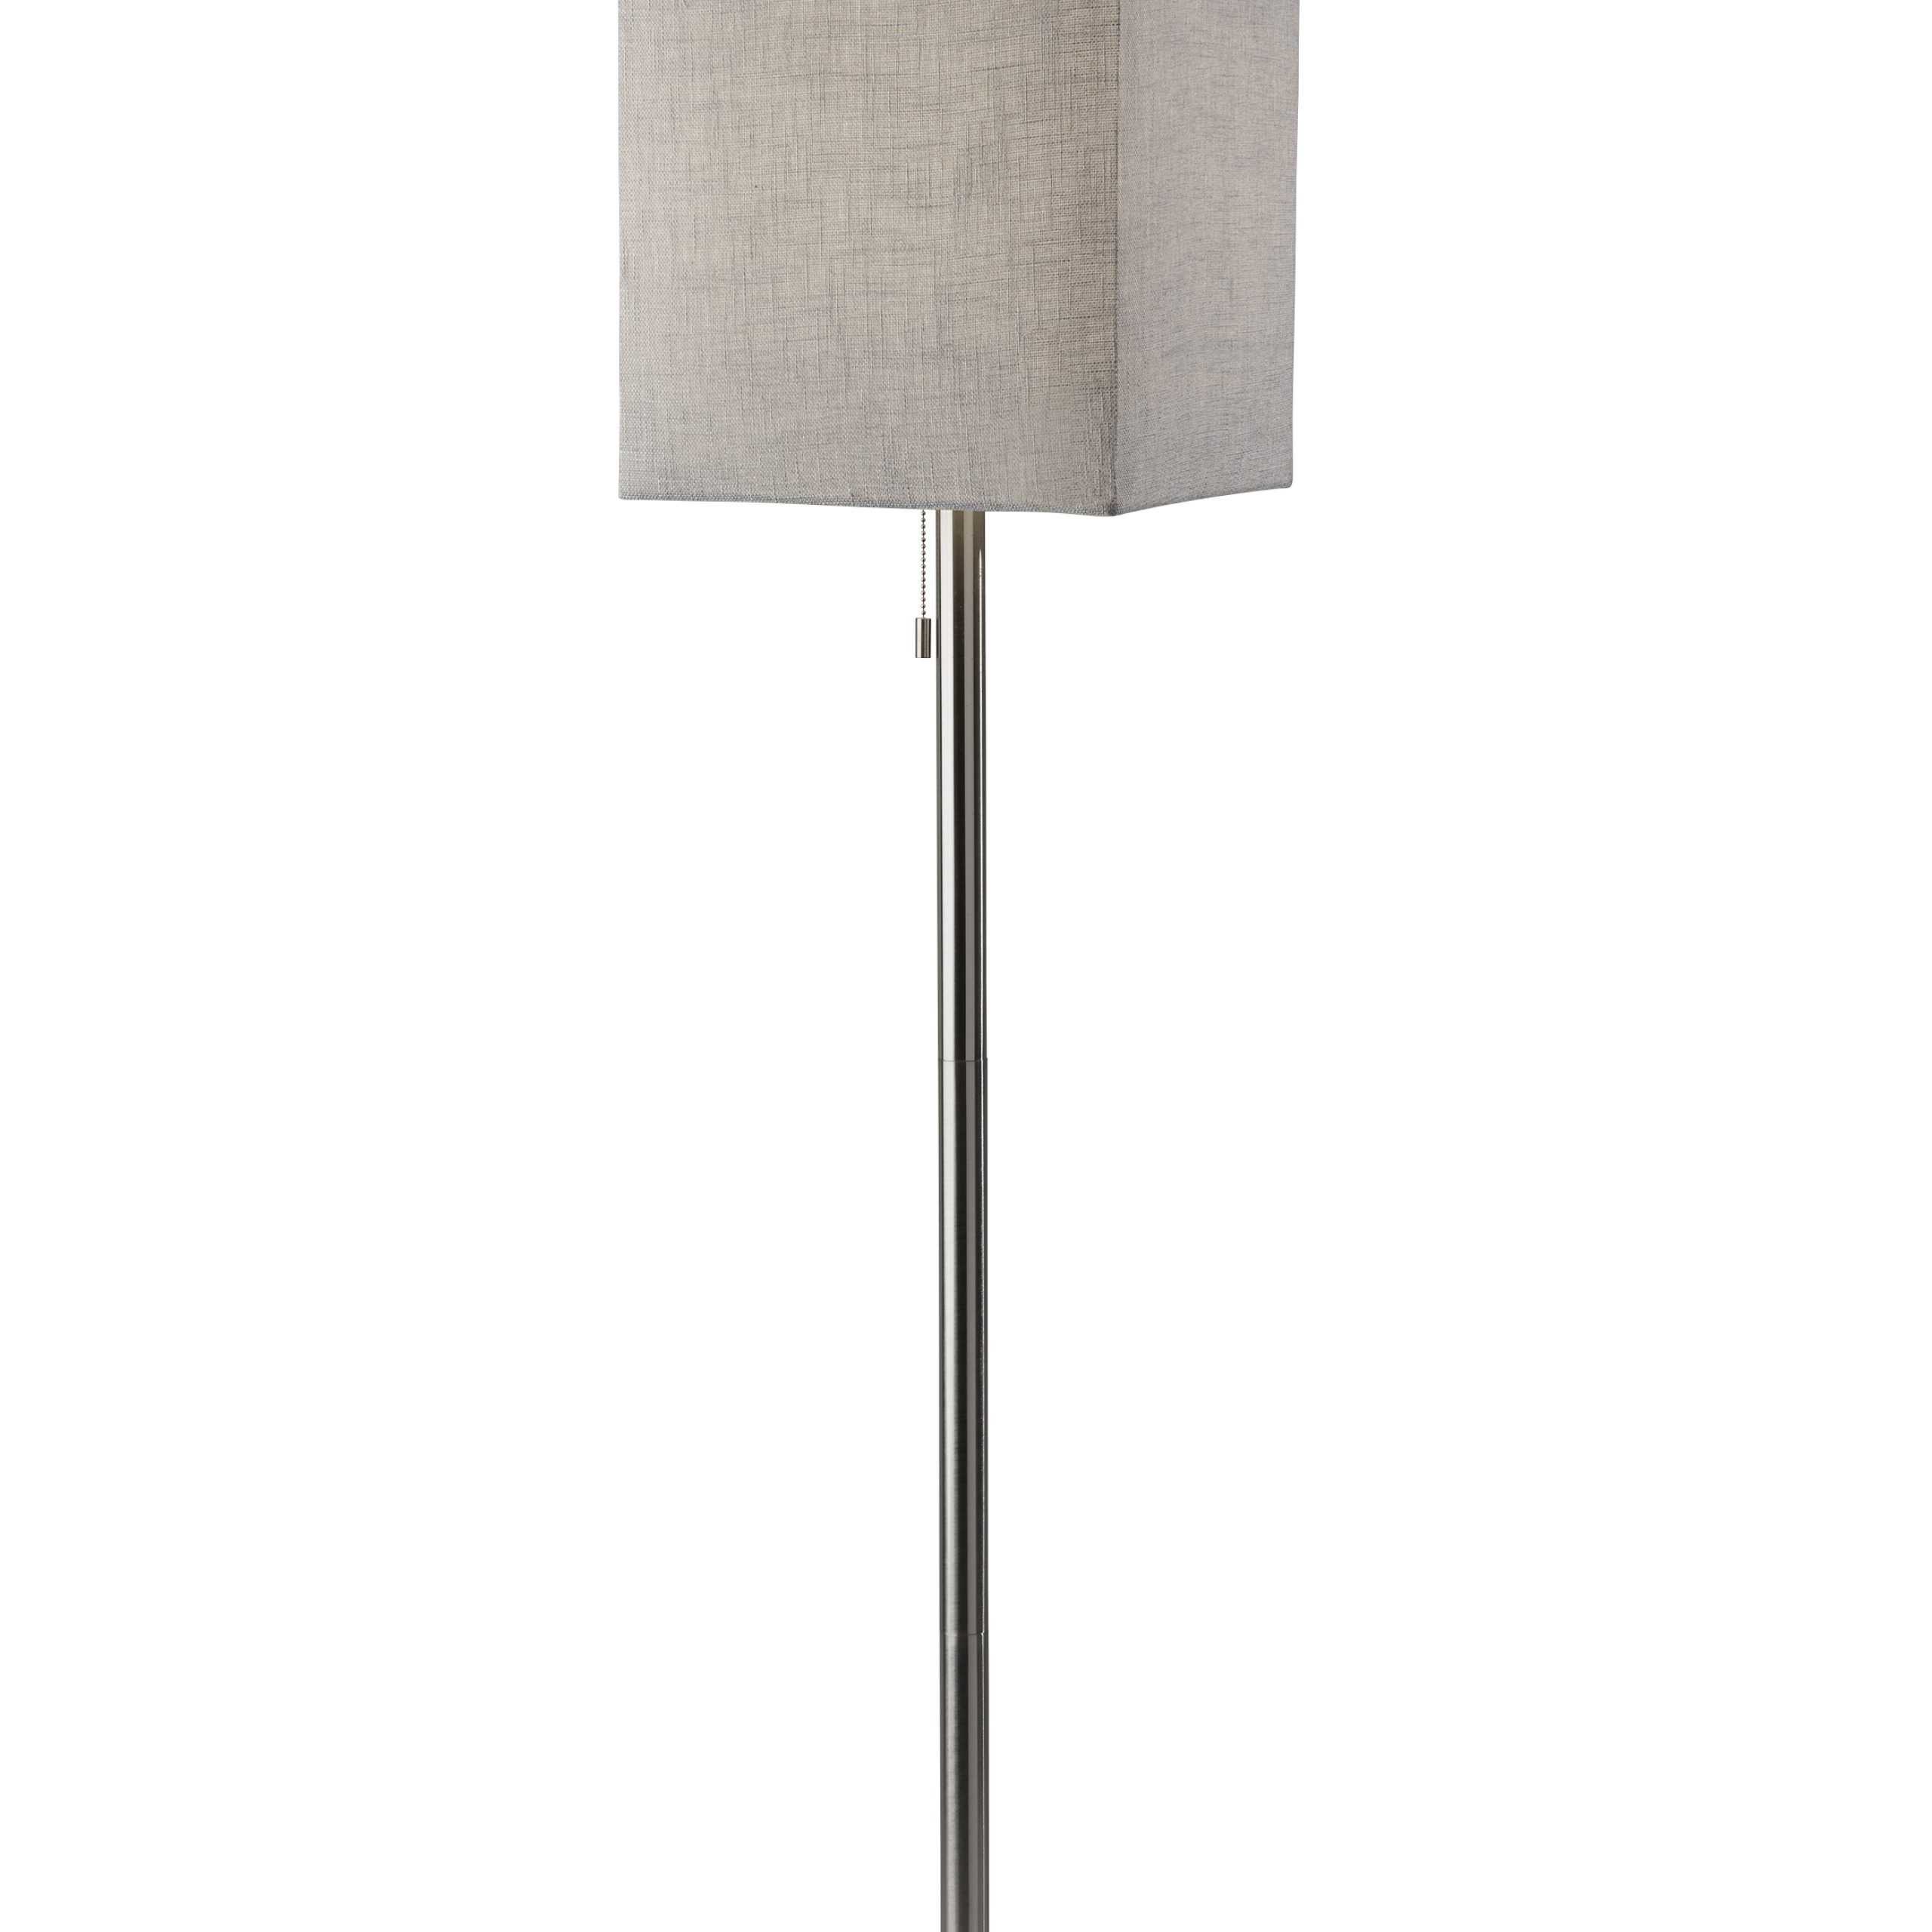 Adesso Estelle Floor Lamp, Brushed Steel, Light Grey Textured Fabric Shade  – Walmart Throughout Grey Textured Floor Lamps (View 2 of 15)